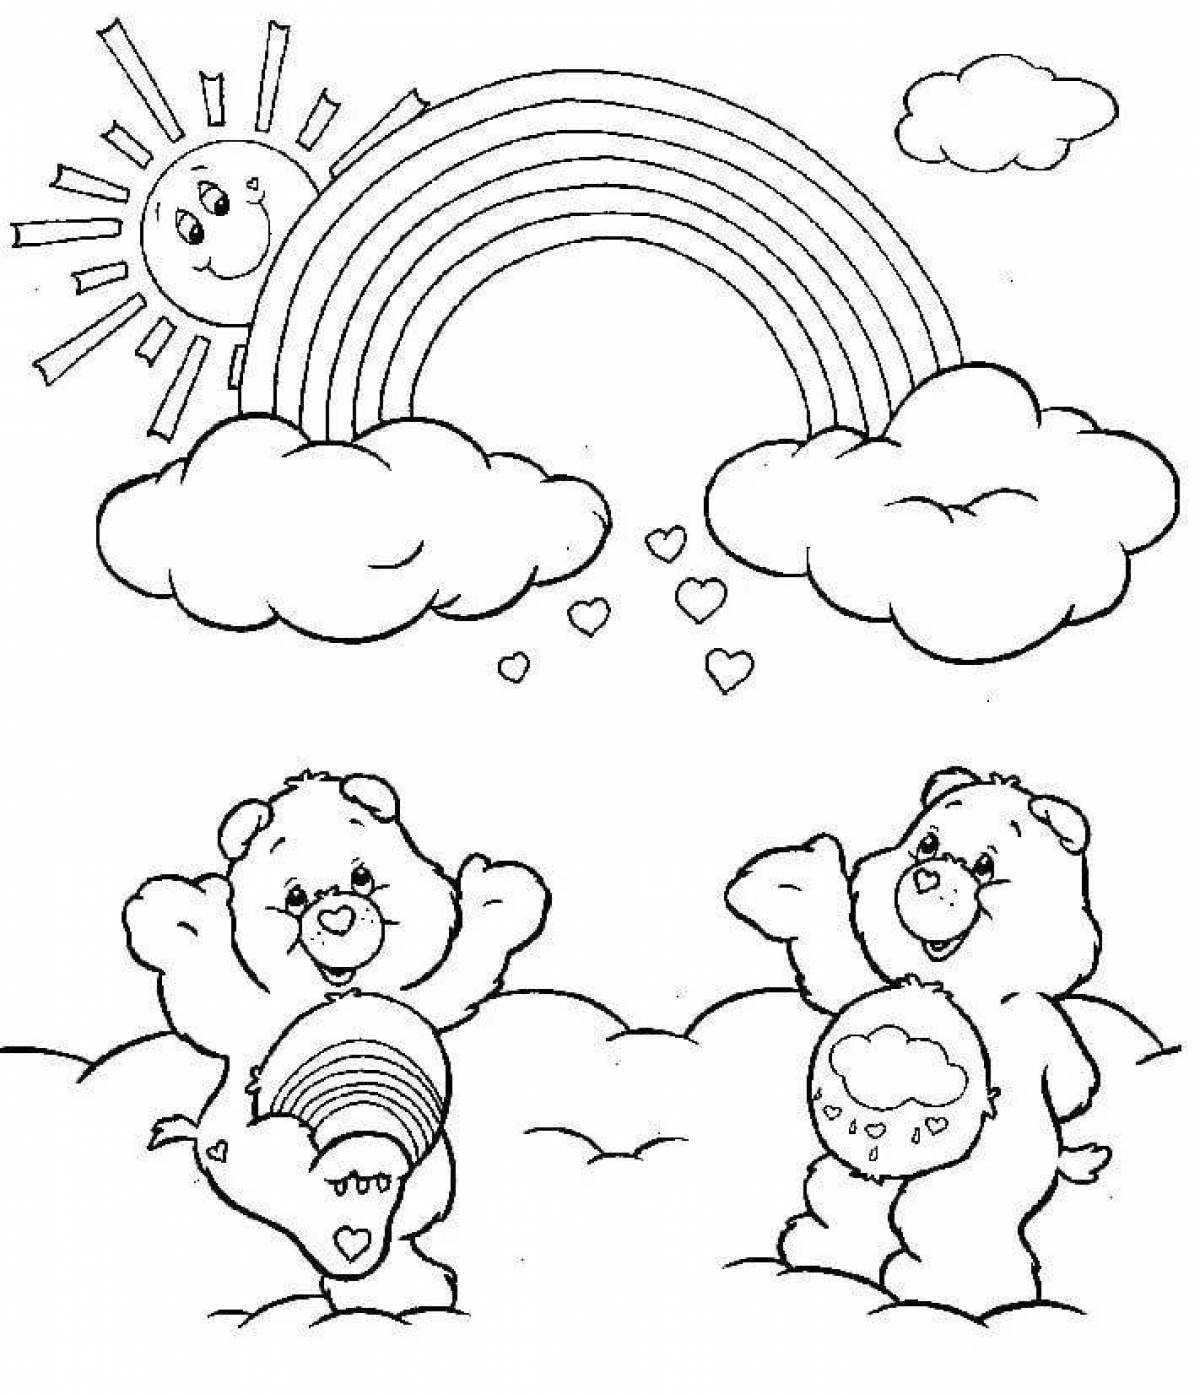 Coloring book cheerful yellow rainbow friend